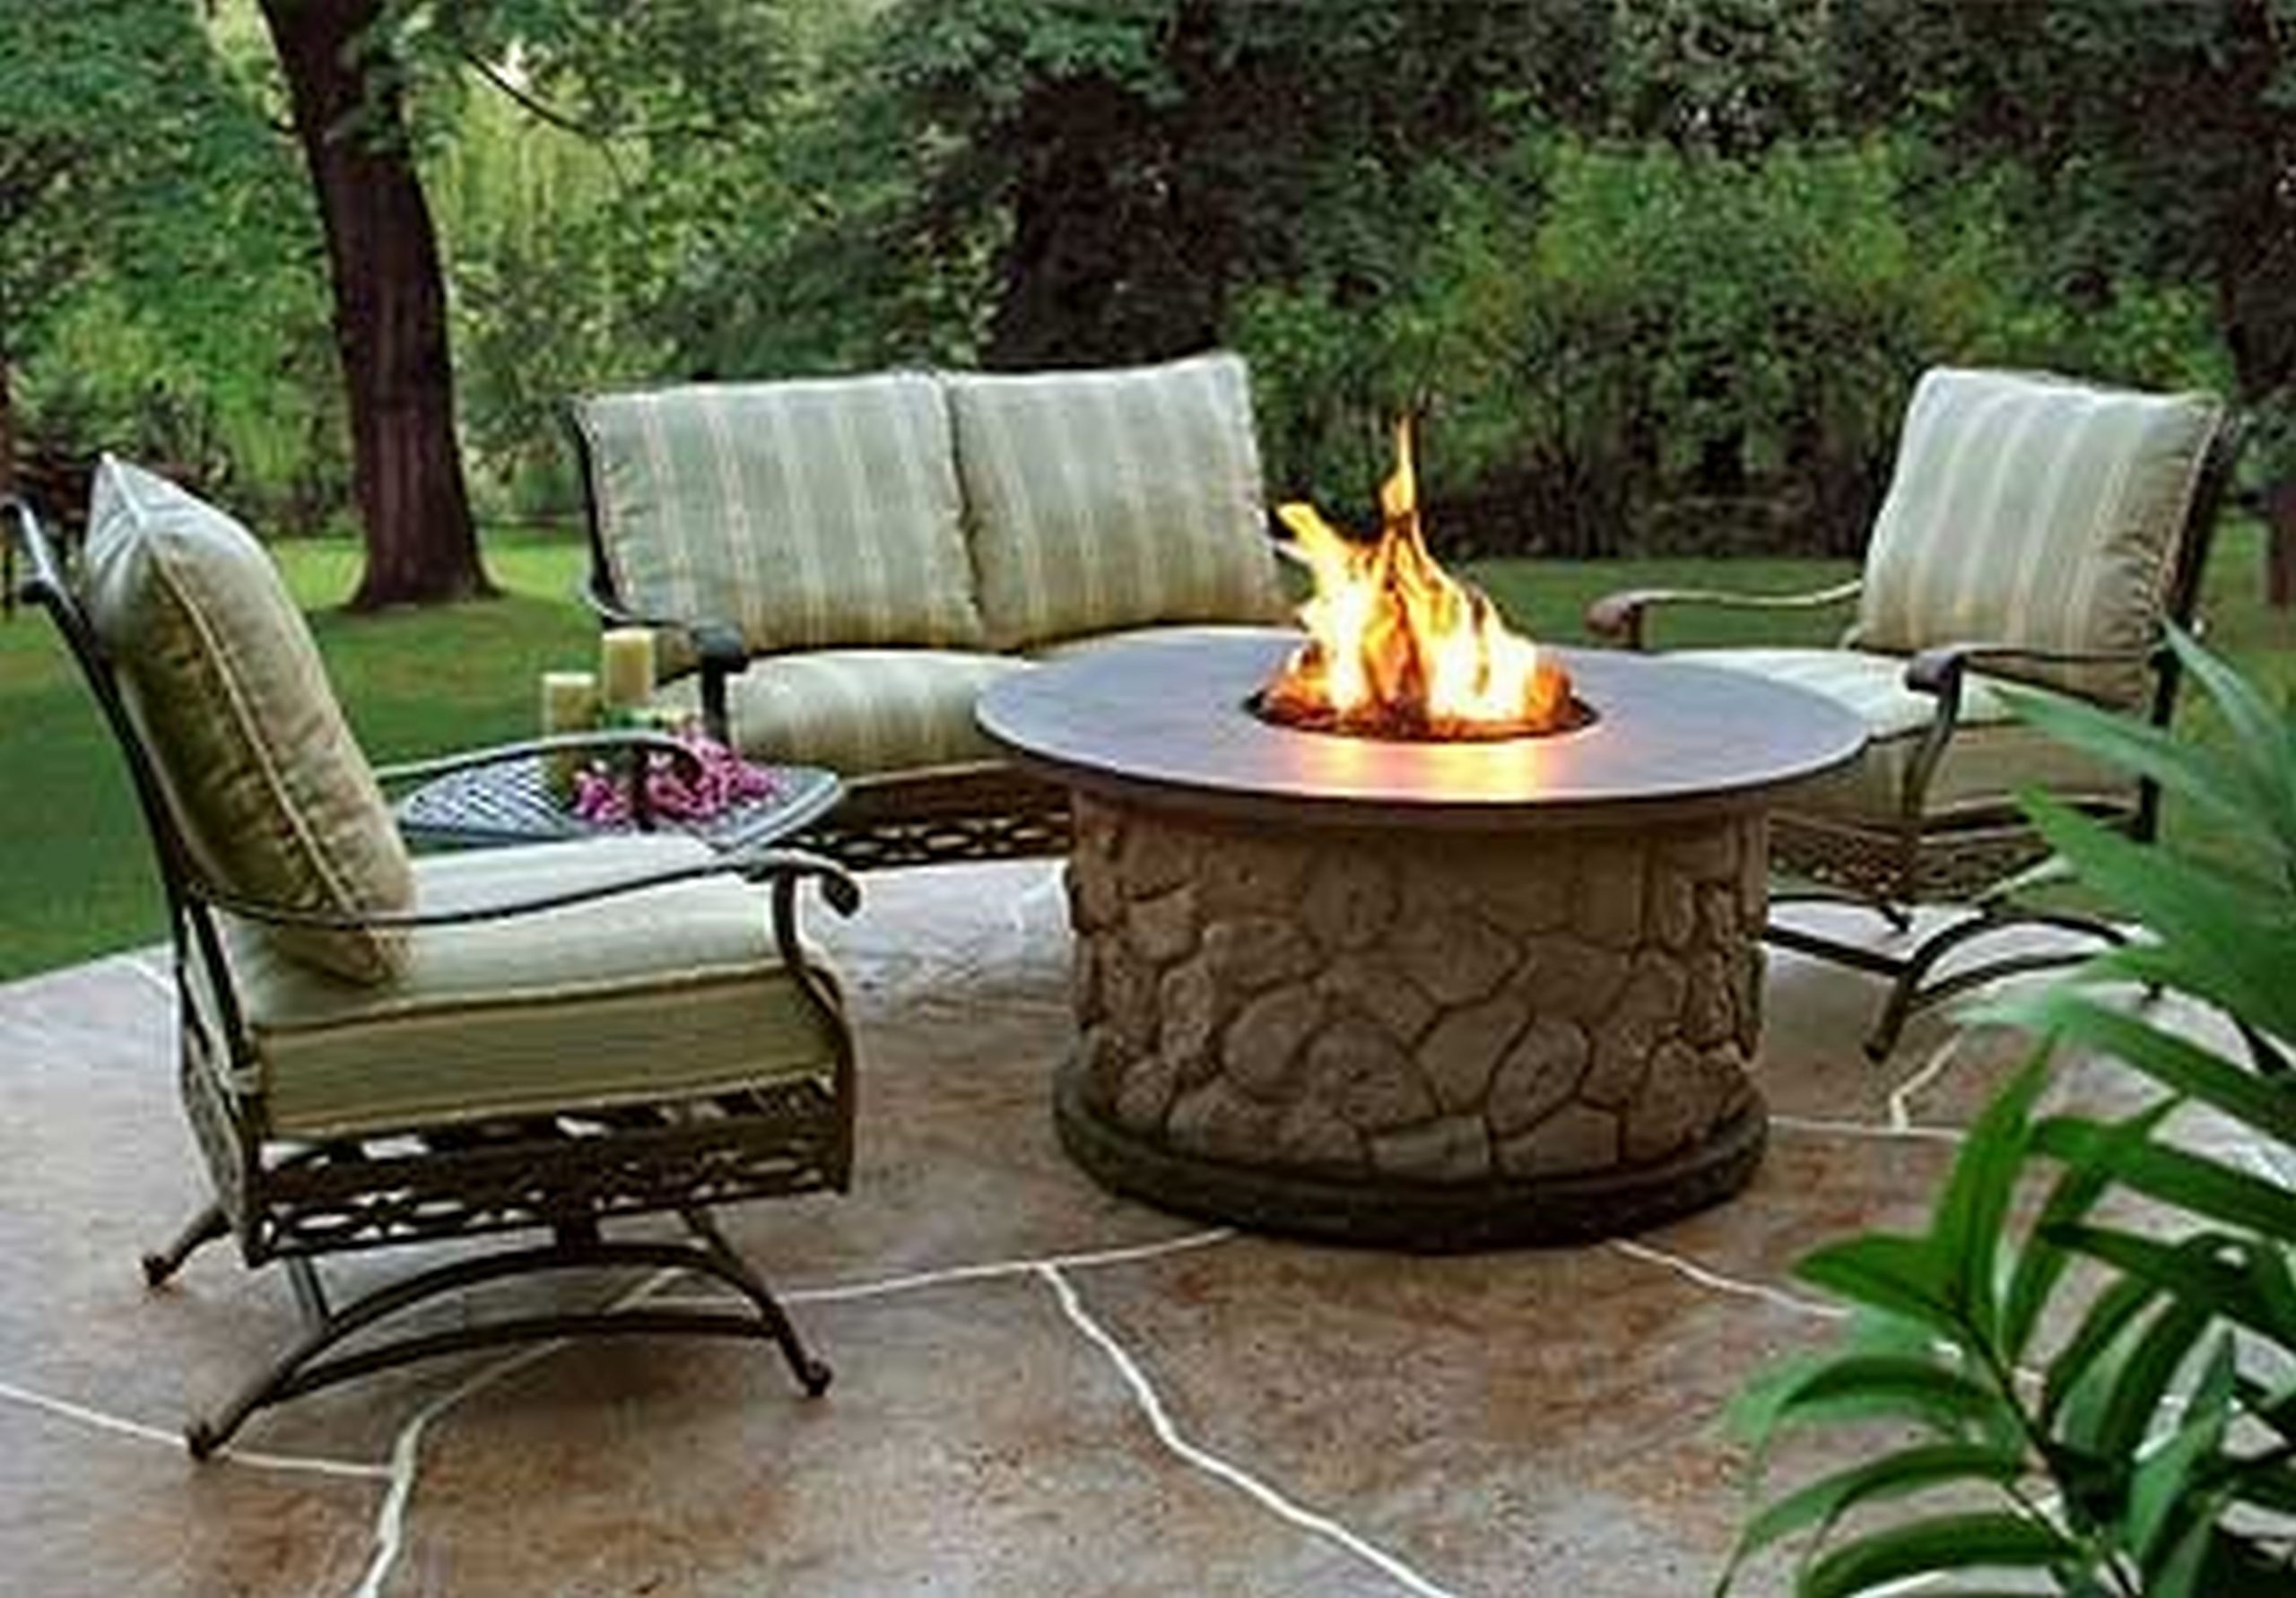 Decorate Small Terrace Furnishing Backyard Designs With Outdoor Inspiration Spectacular Round Table White Stone Fire Pit Ideas With Panels As Well As Antique Iron Frame Chairs With Gray Fabric Seat Furniture + Accessories